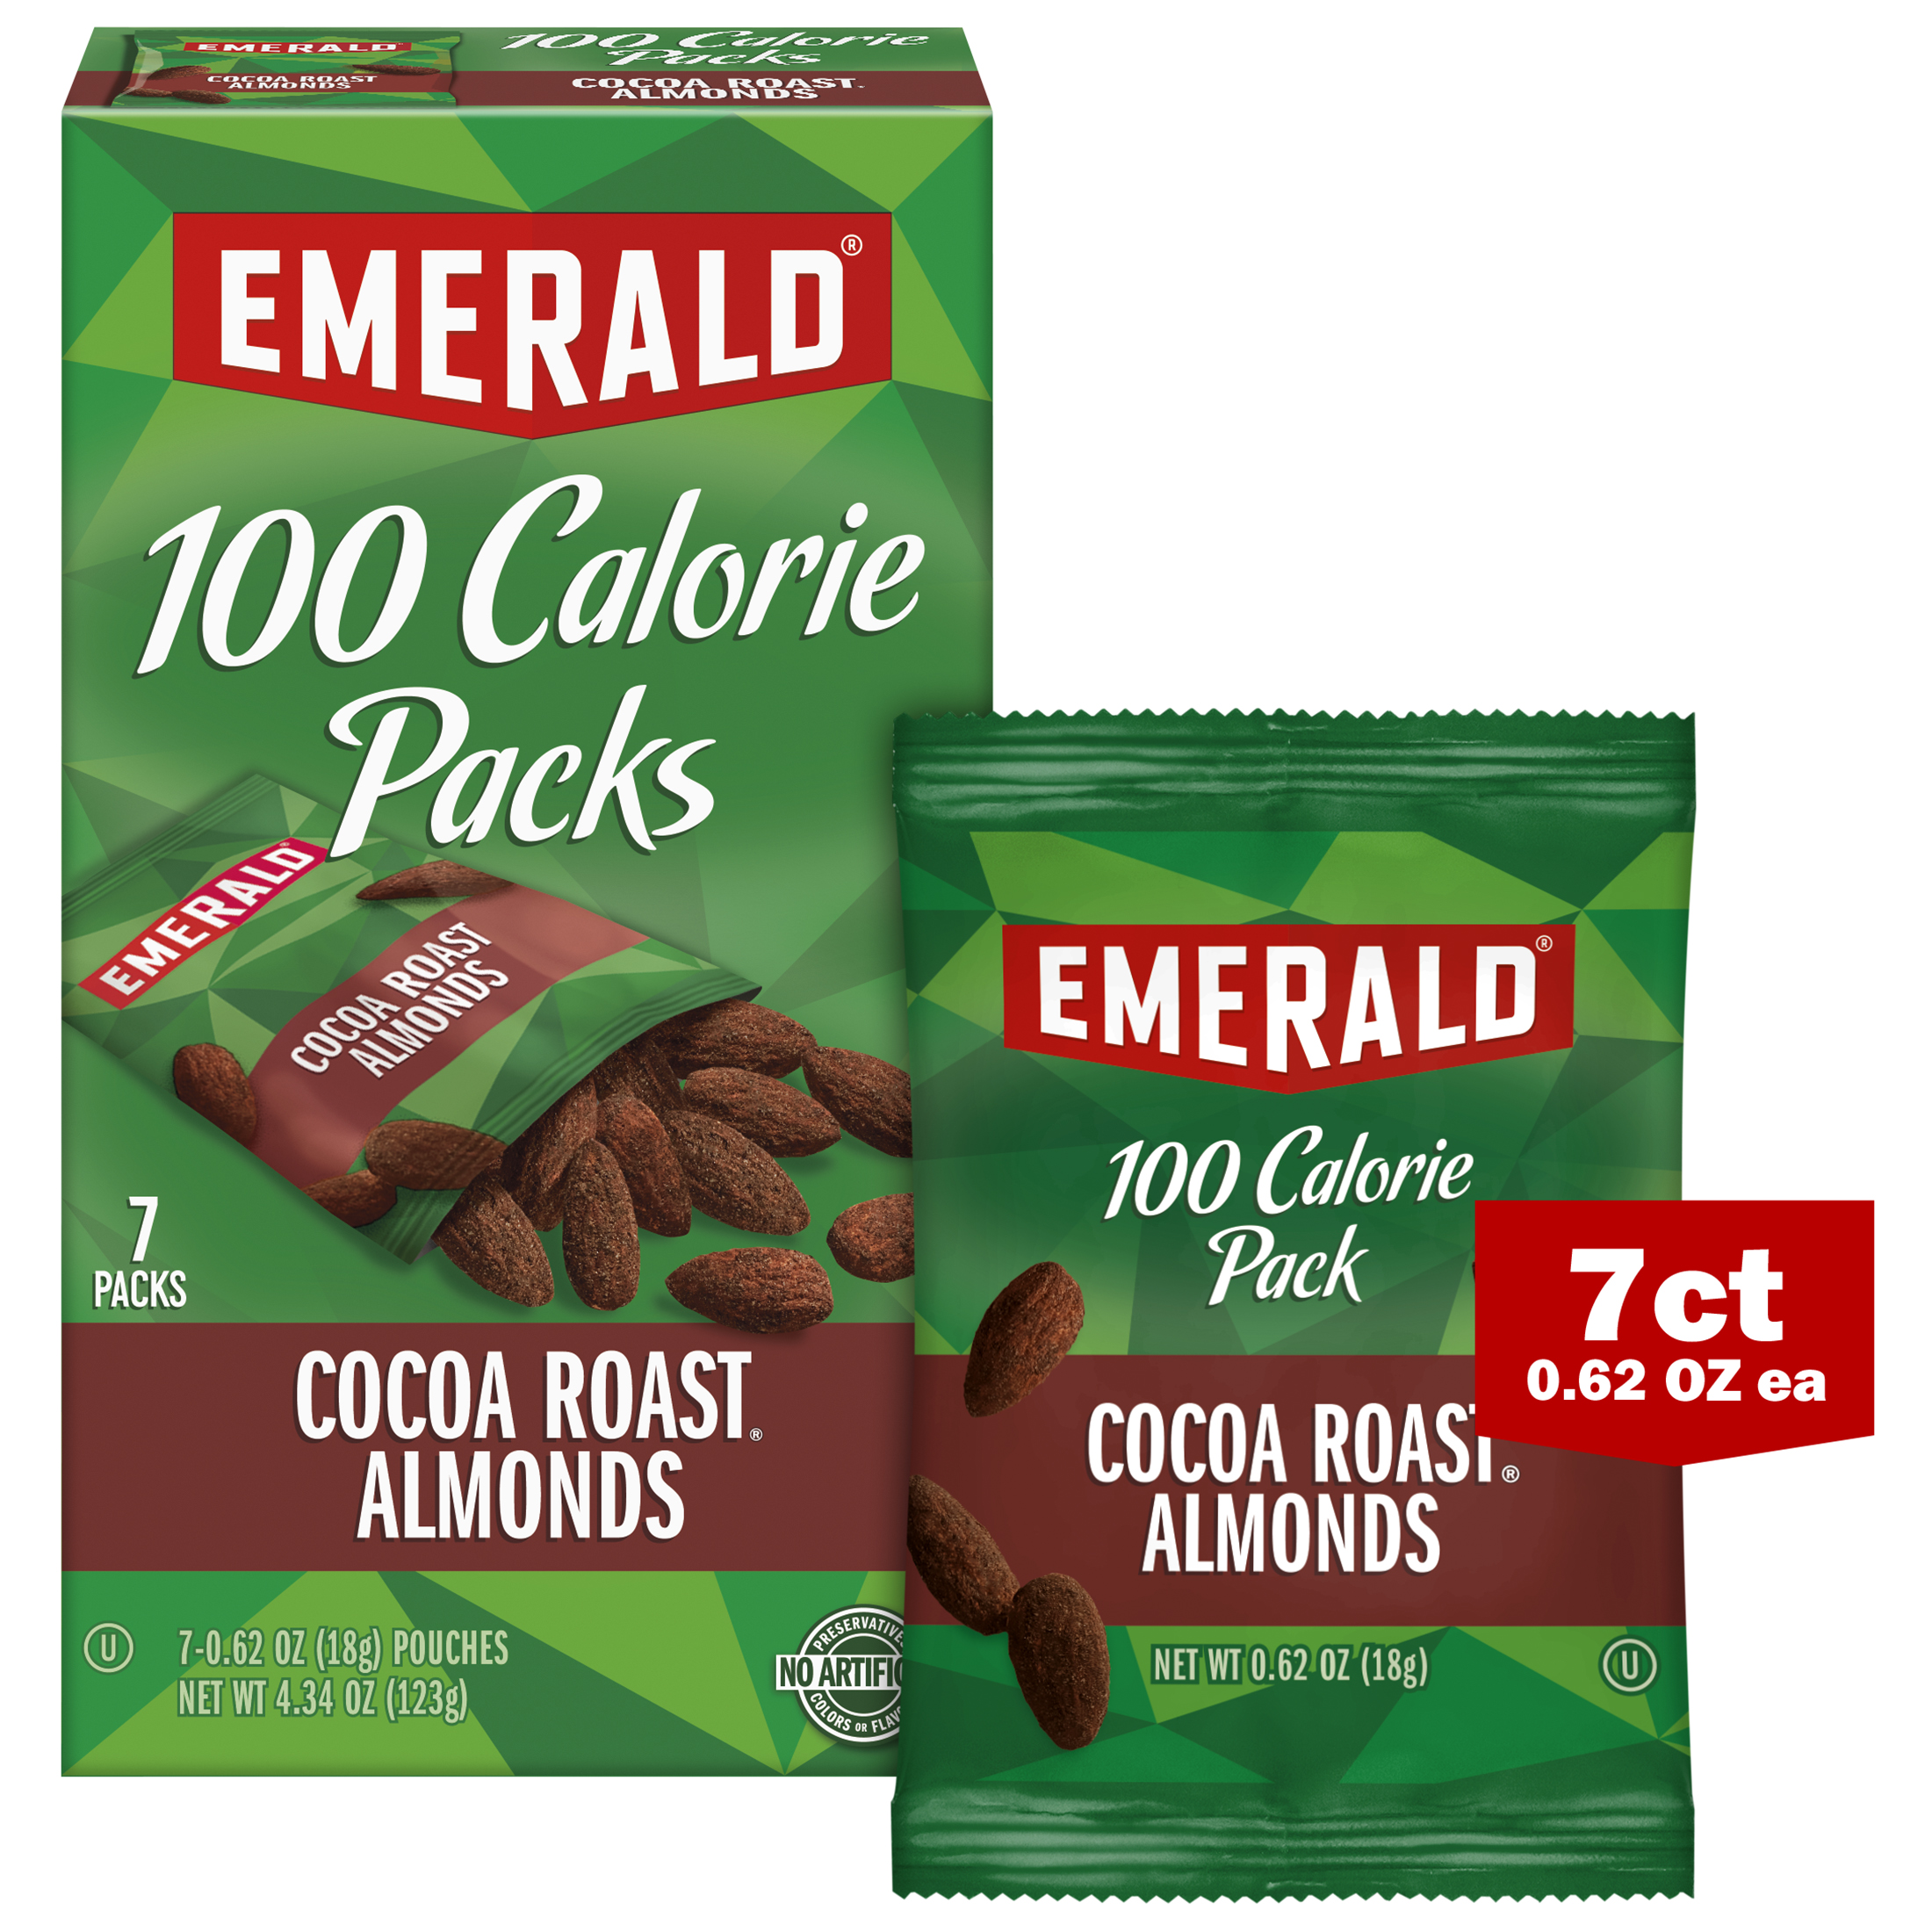 Emerald Nuts Cocoa Roast Almonds, 100 Calorie Packs, 7 Count, 4.34 oz - image 5 of 6